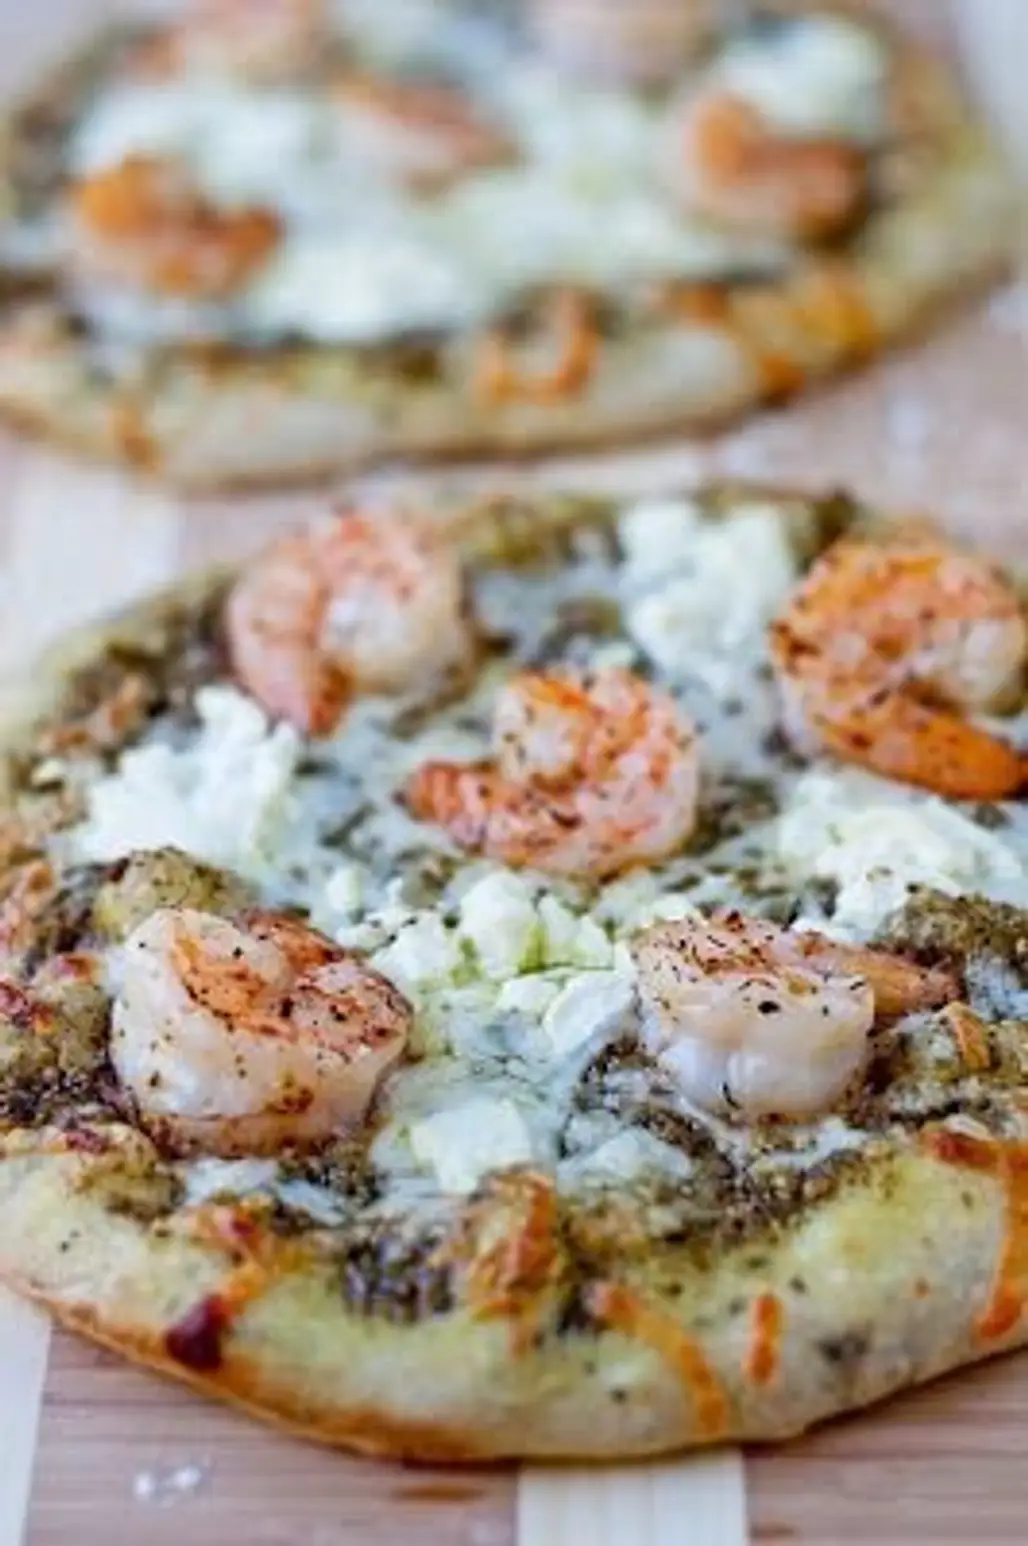 Shrimp and Pesto Pizza with Goat Cheese